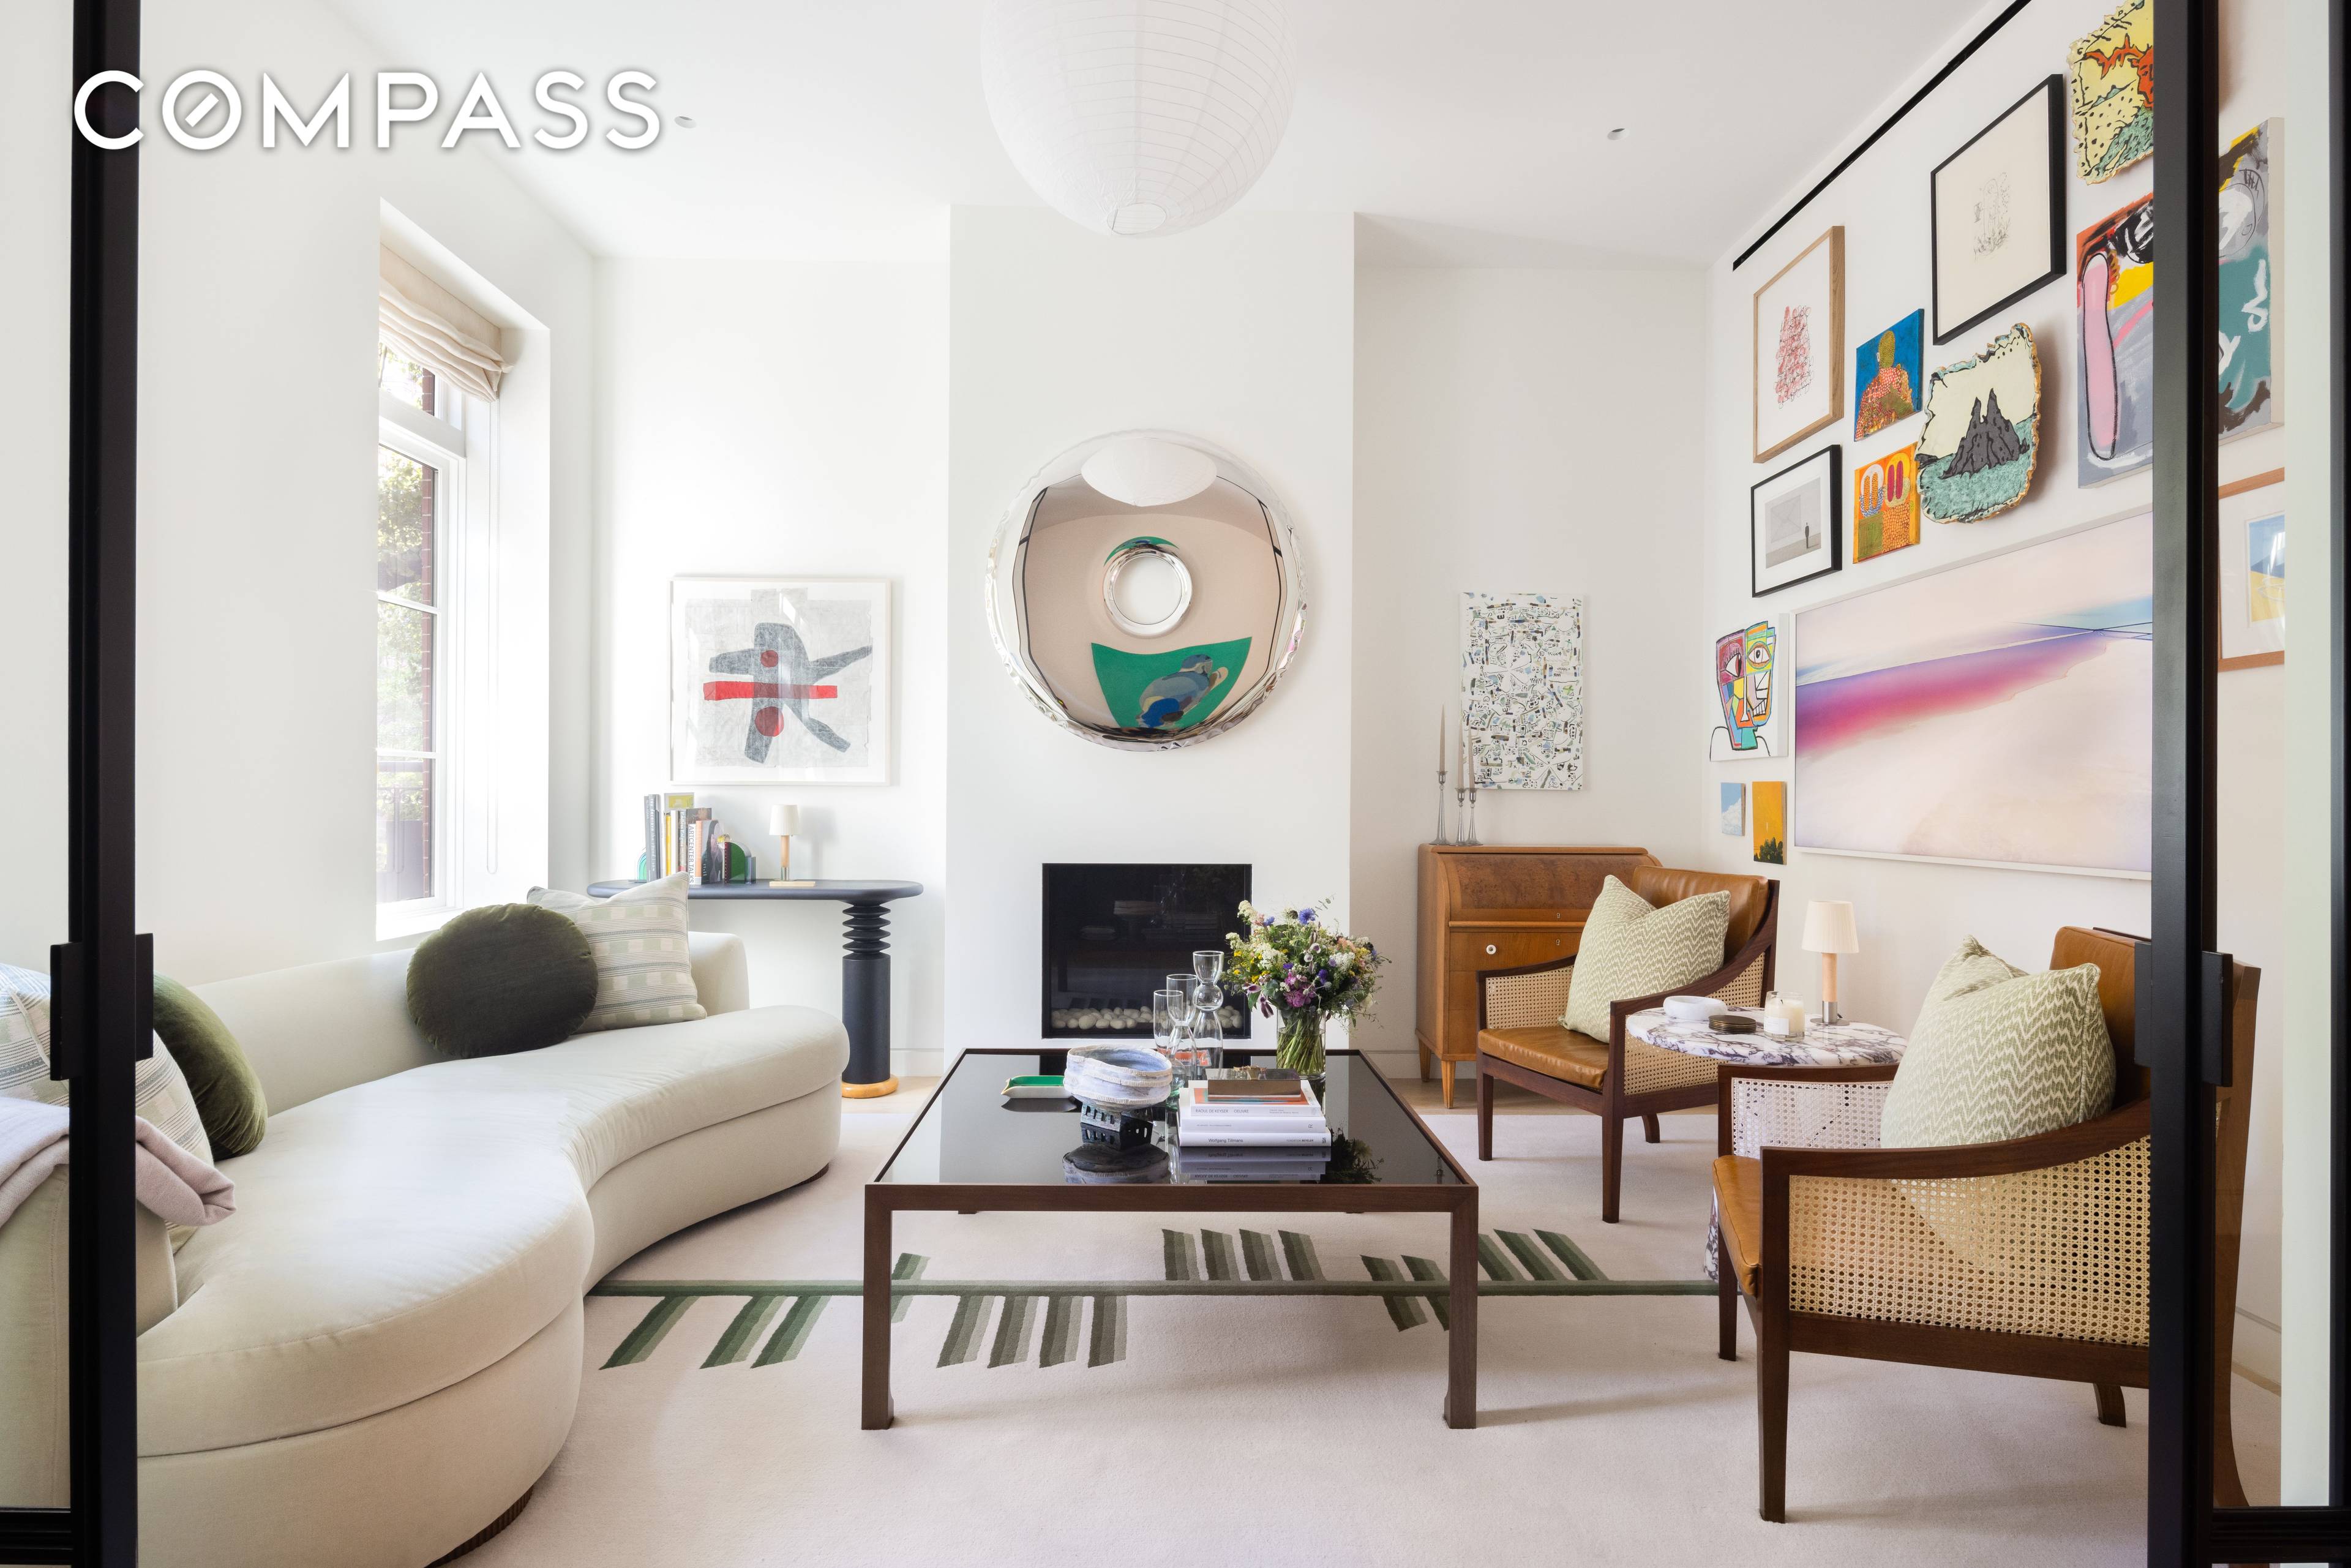 137 West 13th Street in prime West Village, is an exceptionally refined six story townhouse that has been completely modernized for a discreet and discerning buyer.